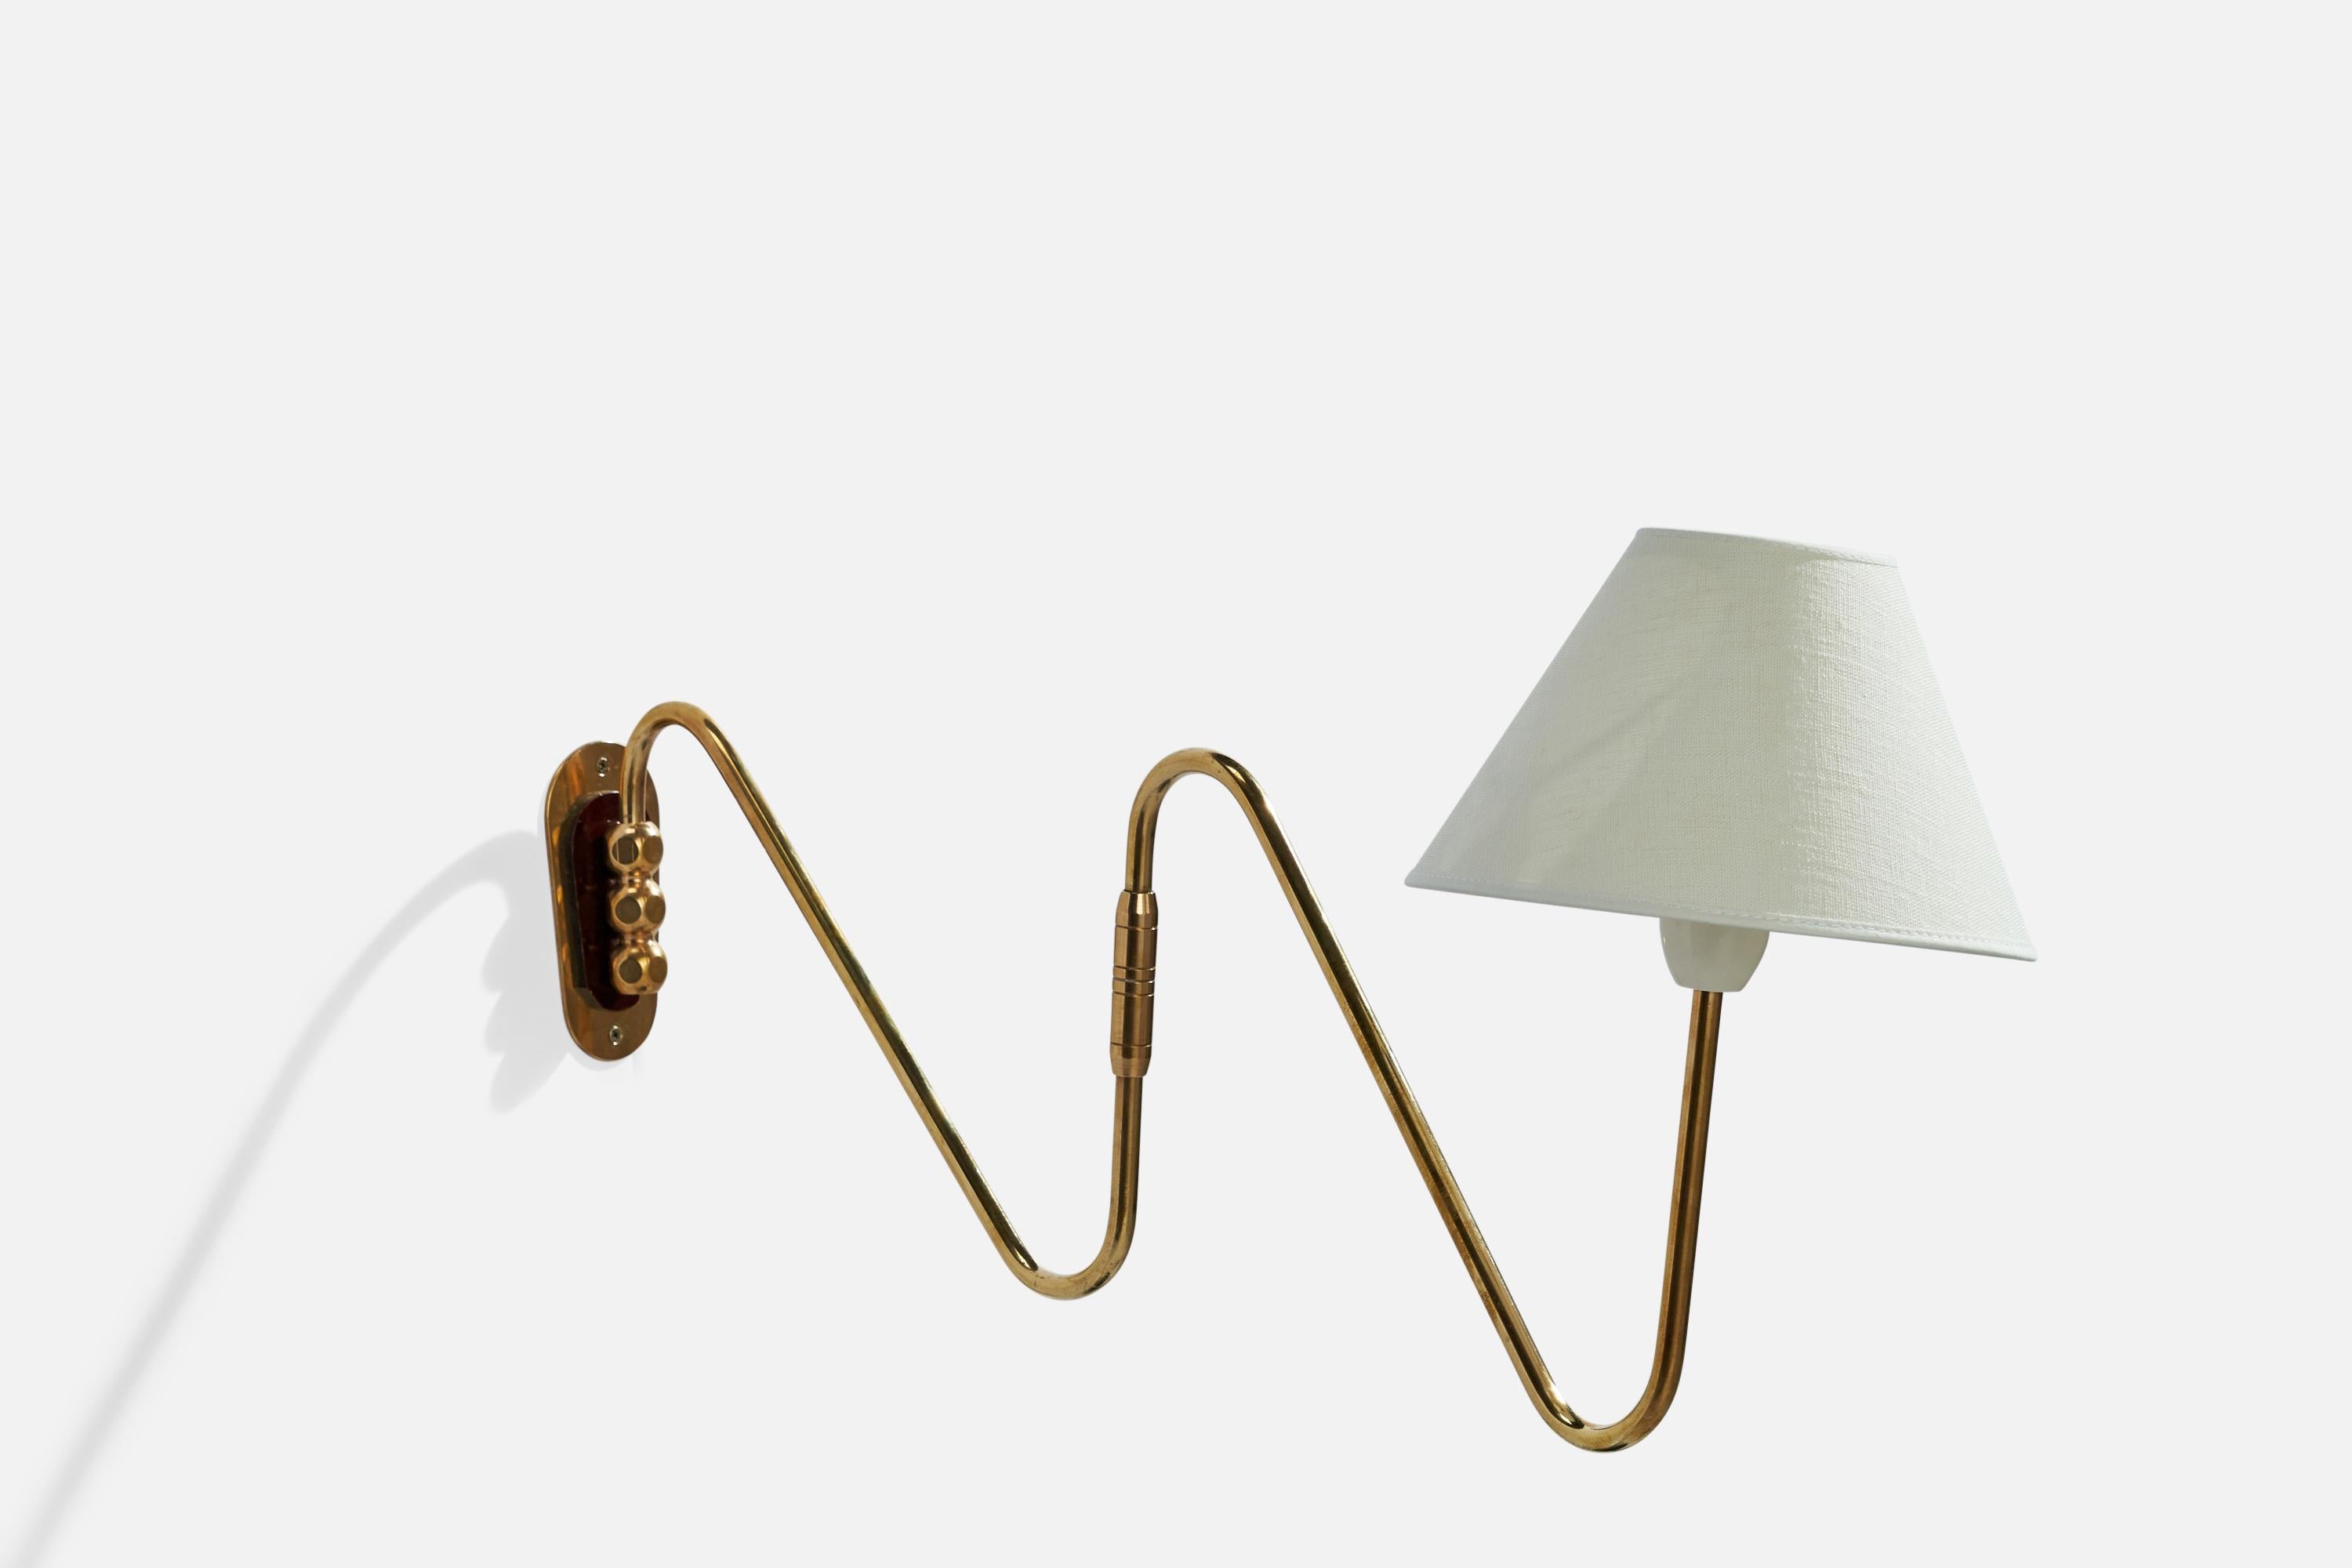 An adjustable brass and white fabric wall light designed and produced in Denmark, 1930s.

Dimensions variable.
Overall Dimensions (inches): 10.5”  H x 11” W x 21.5” D
Back Plate Dimensions (inches): 4.75” H x 2.25” W x .25” D
Bulb Specifications: